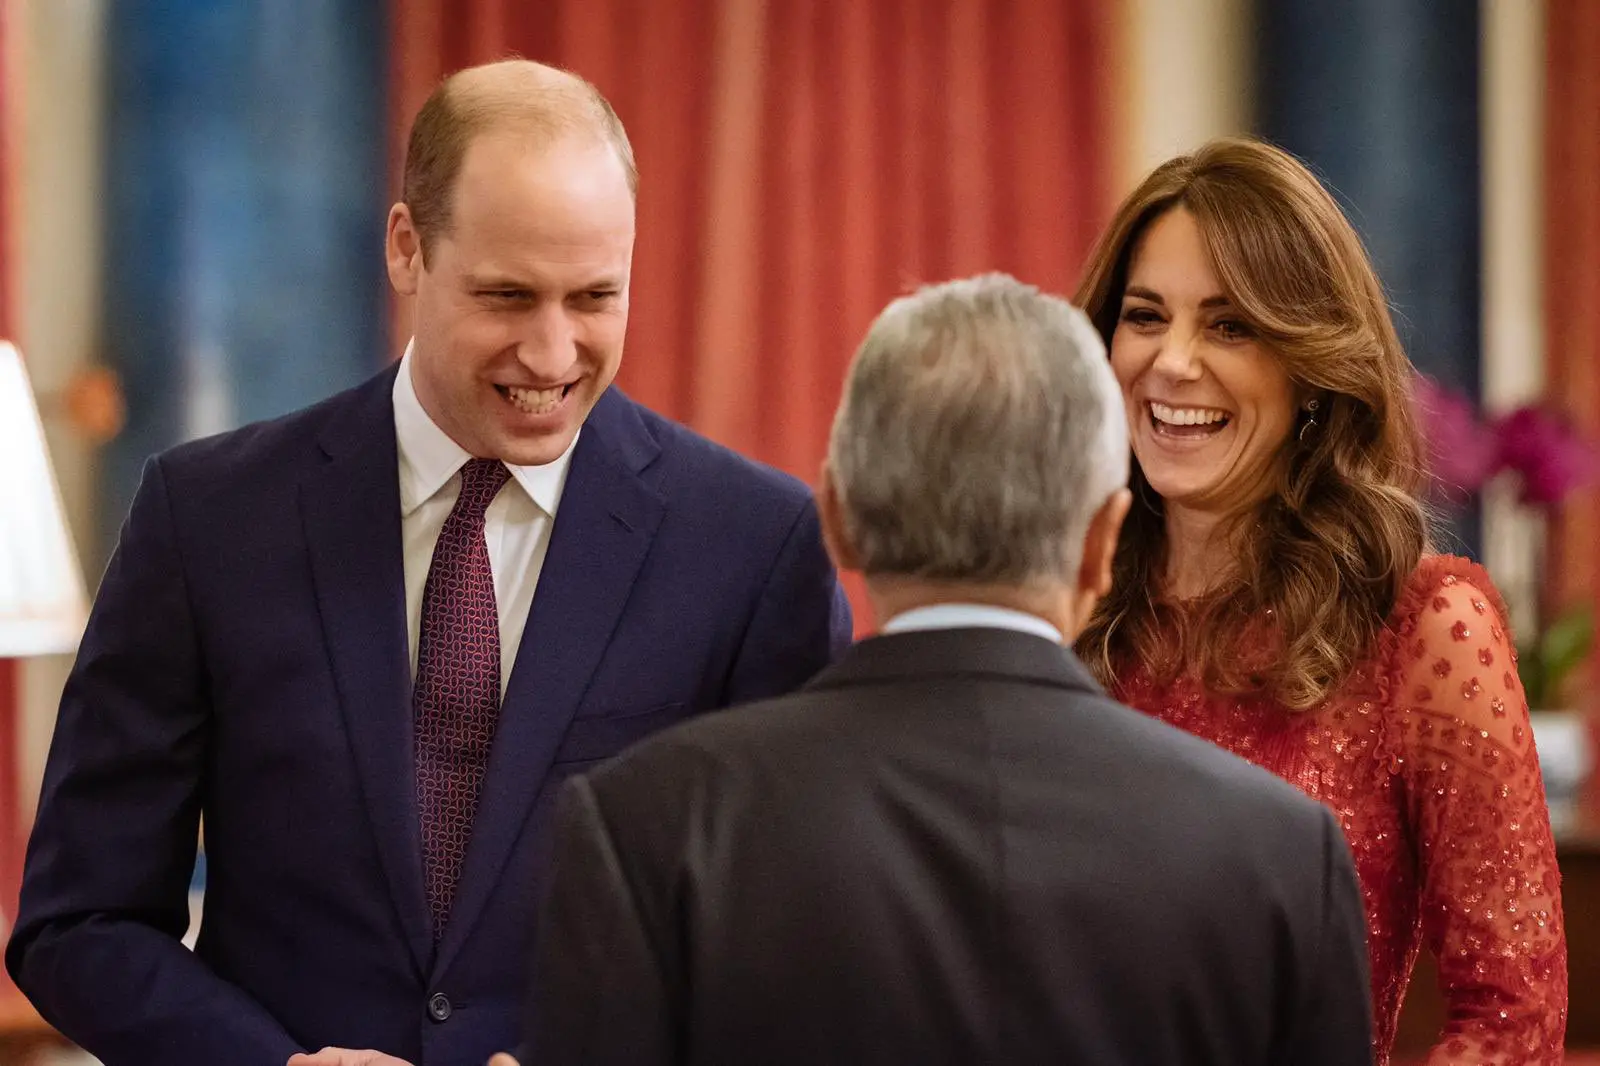 The Duke and Duchess of Cambridge meeting the guests of the UK-Africa summit reception at Buckingham Palace